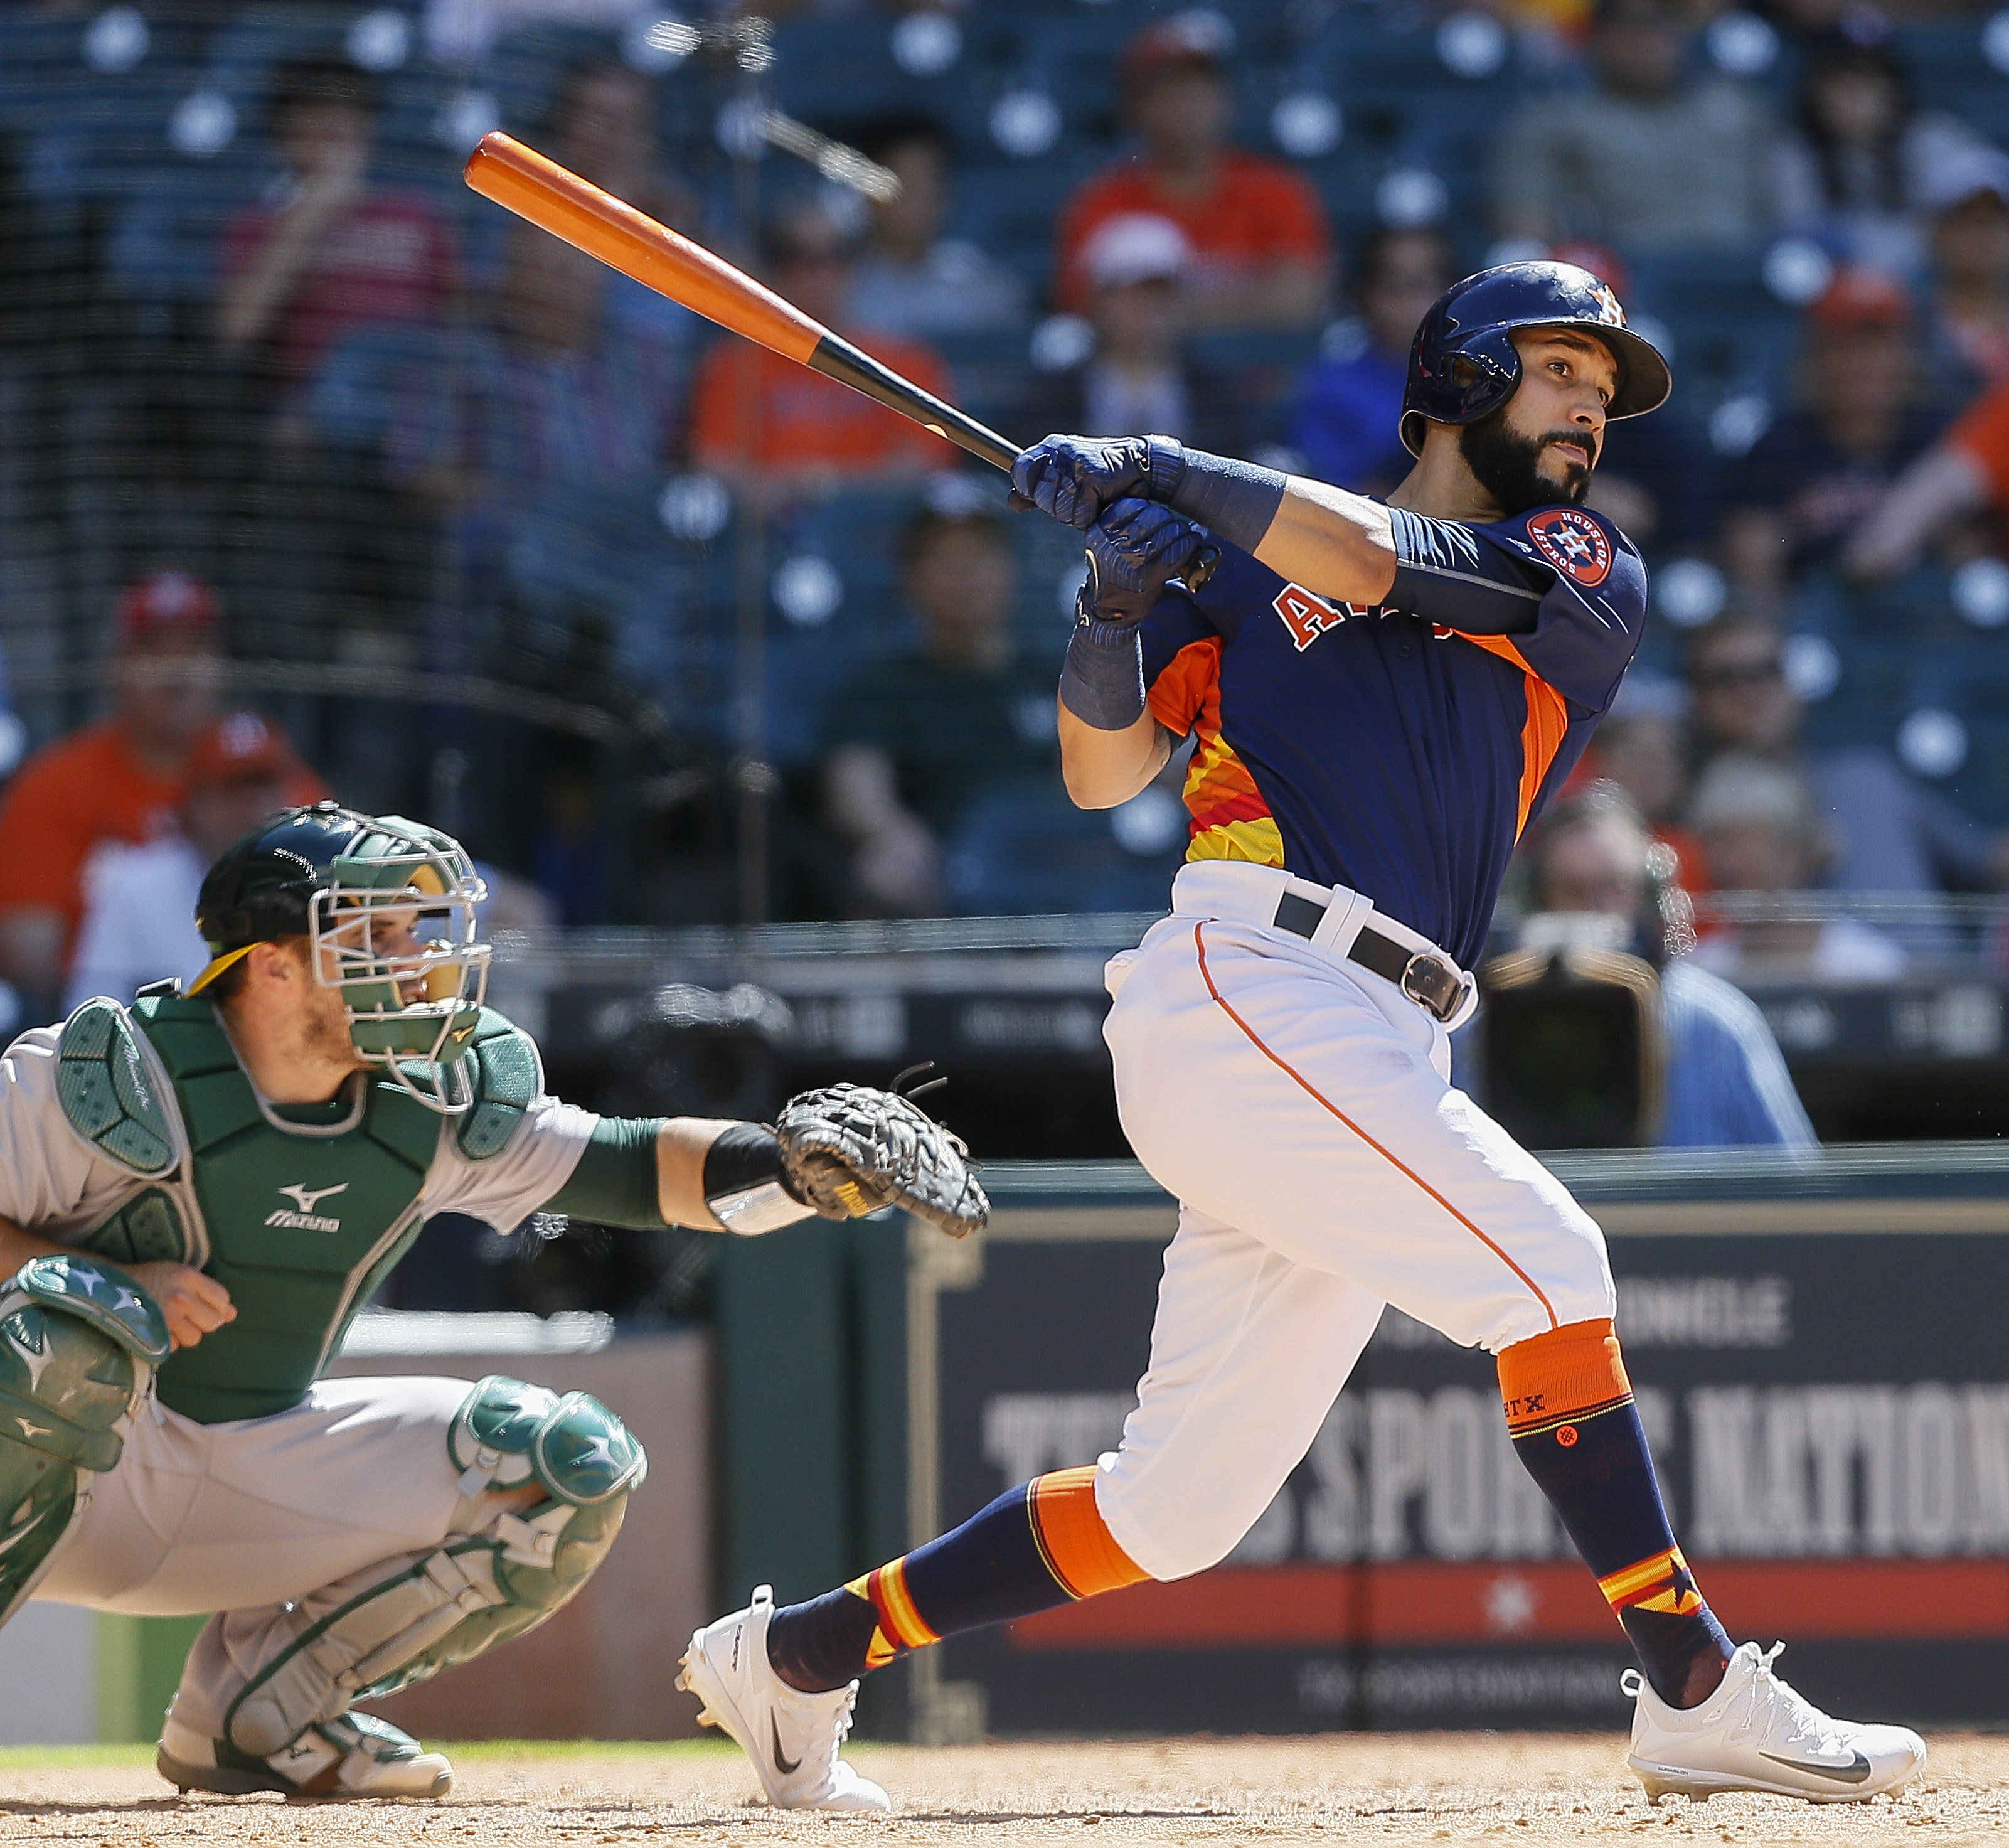 23 Jun, 2015: Houston Astros shortstop (9) Marwin Gonzalez on the field  during batting practice before a game against the Los Angeles Angels of  Anaheim played at Angel Stadium of Anaheim. (Icon